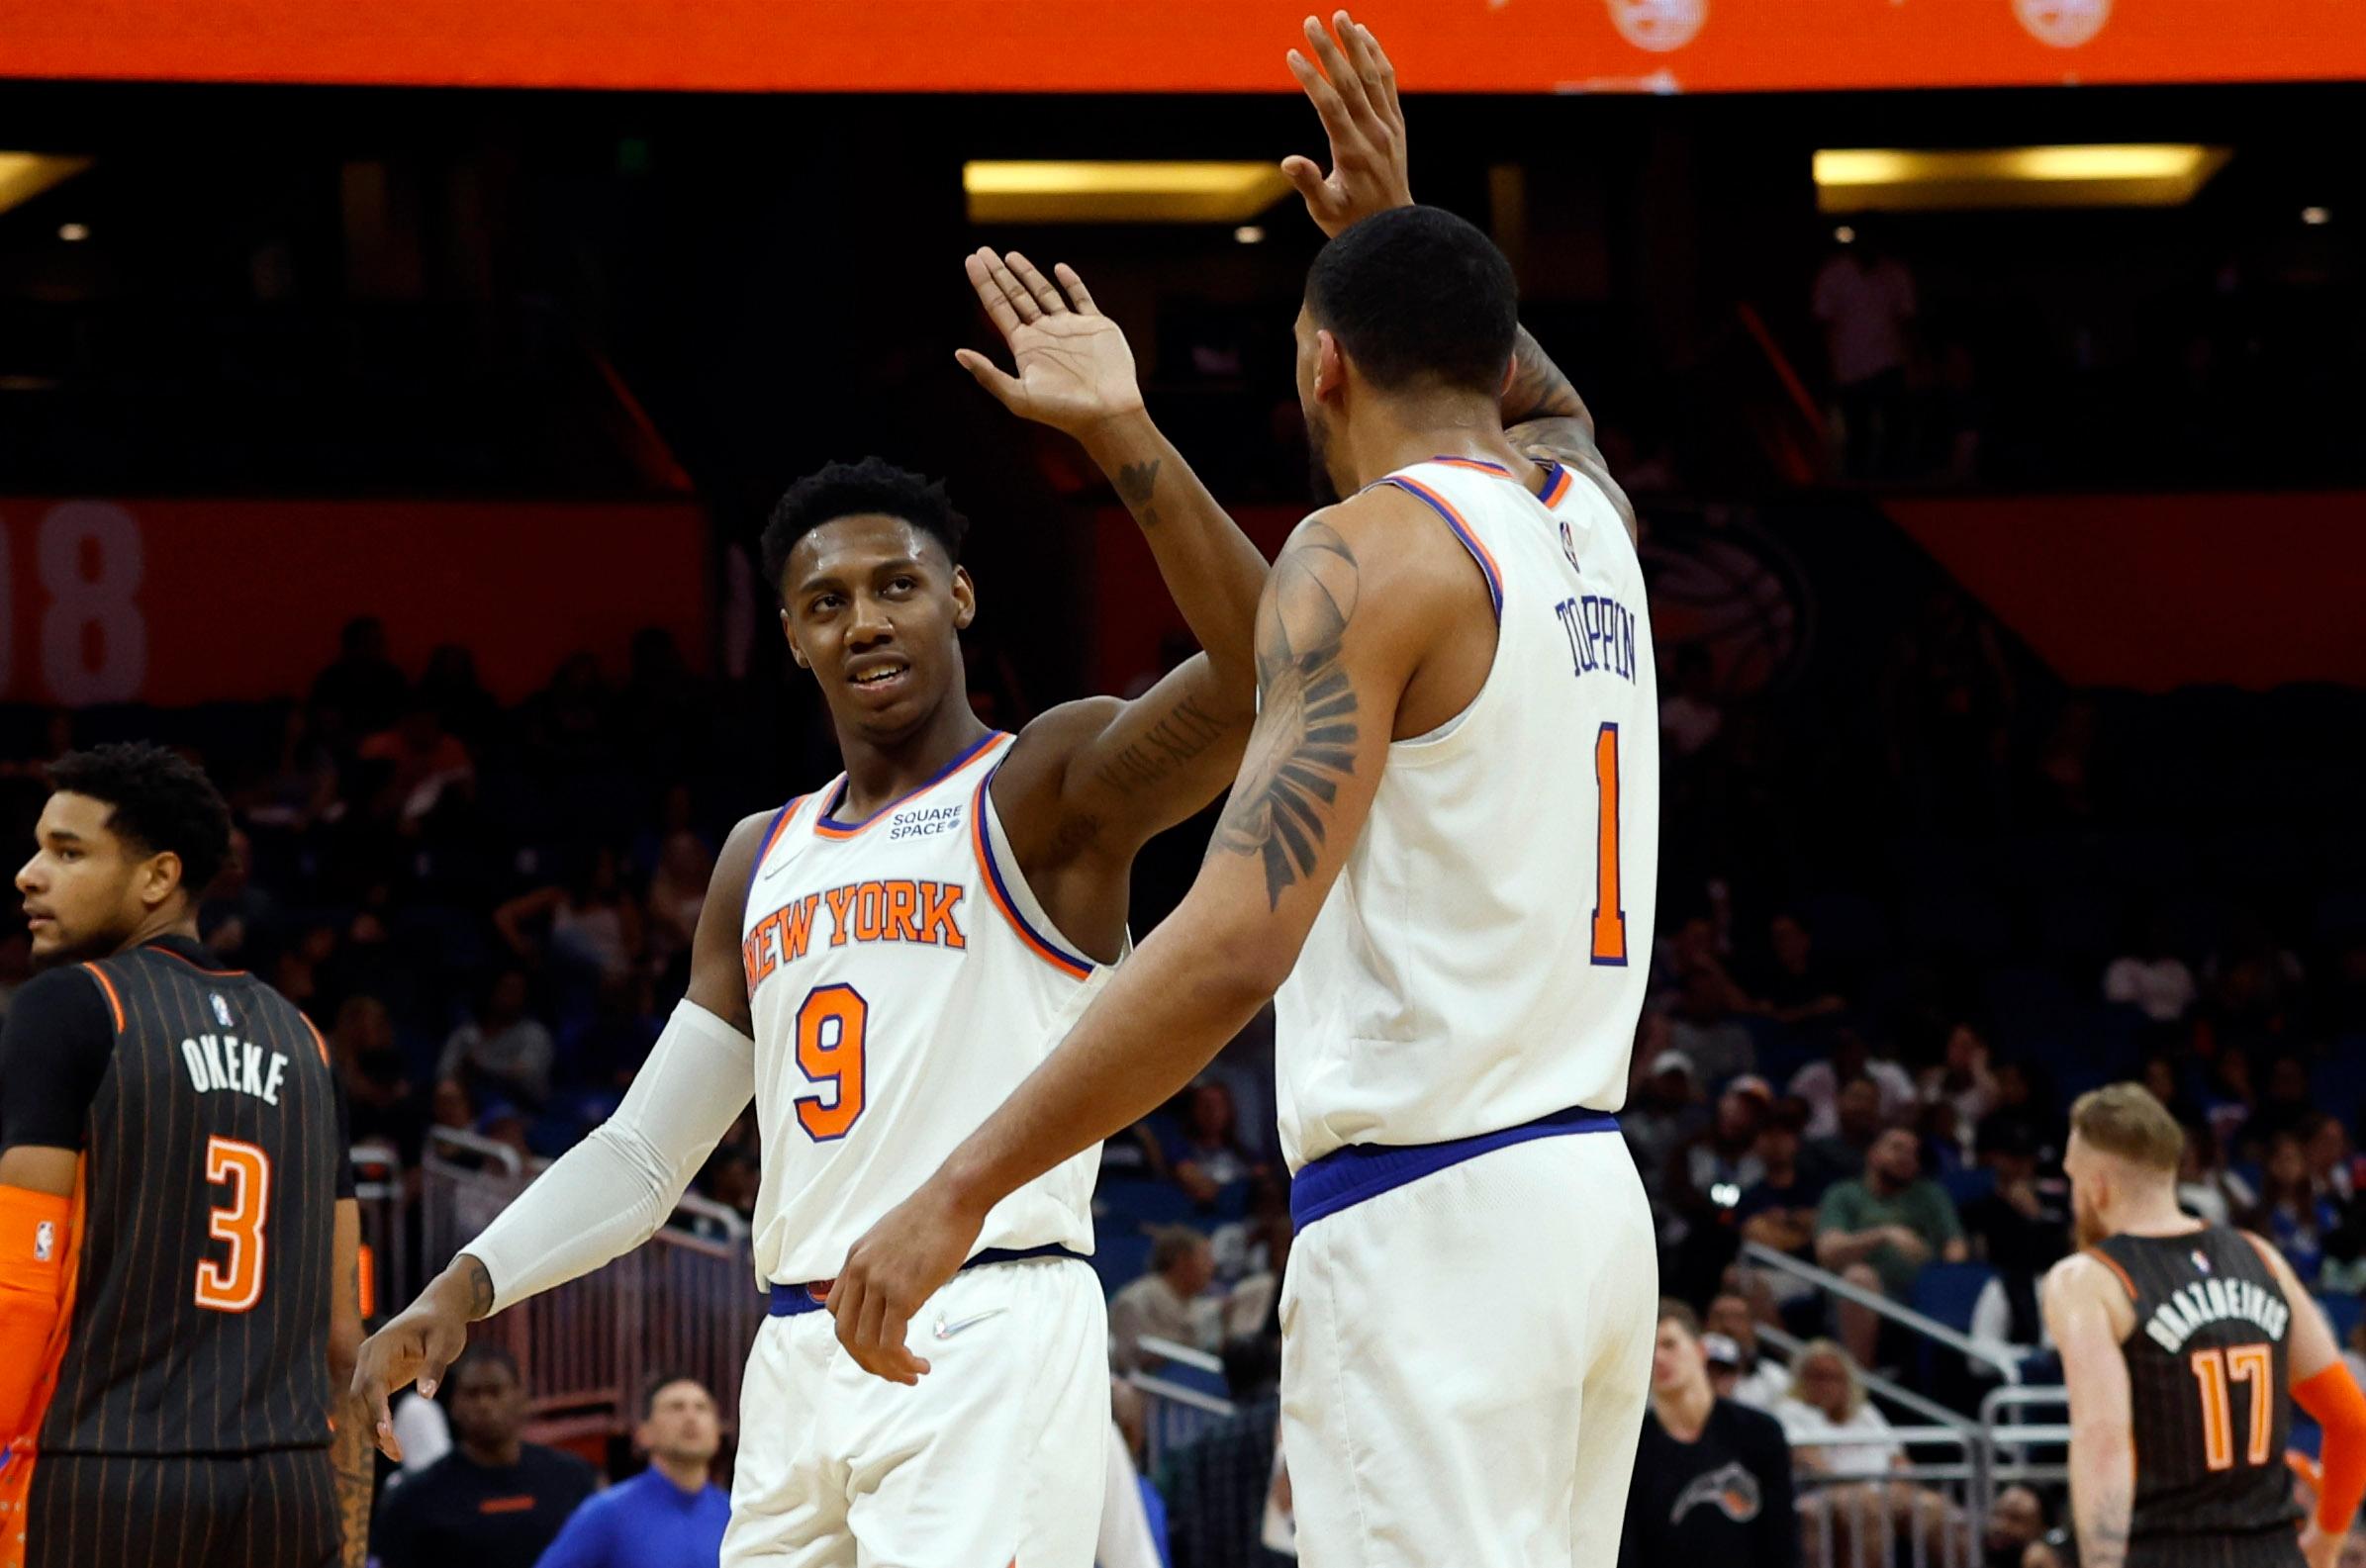 New York Knicks guard RJ Barrett (9) high fives New York Knicks forward Obi Toppin (1) against the Orlando Magic during the second quarter at Amway Center. / Kim Klement-USA TODAY Sports